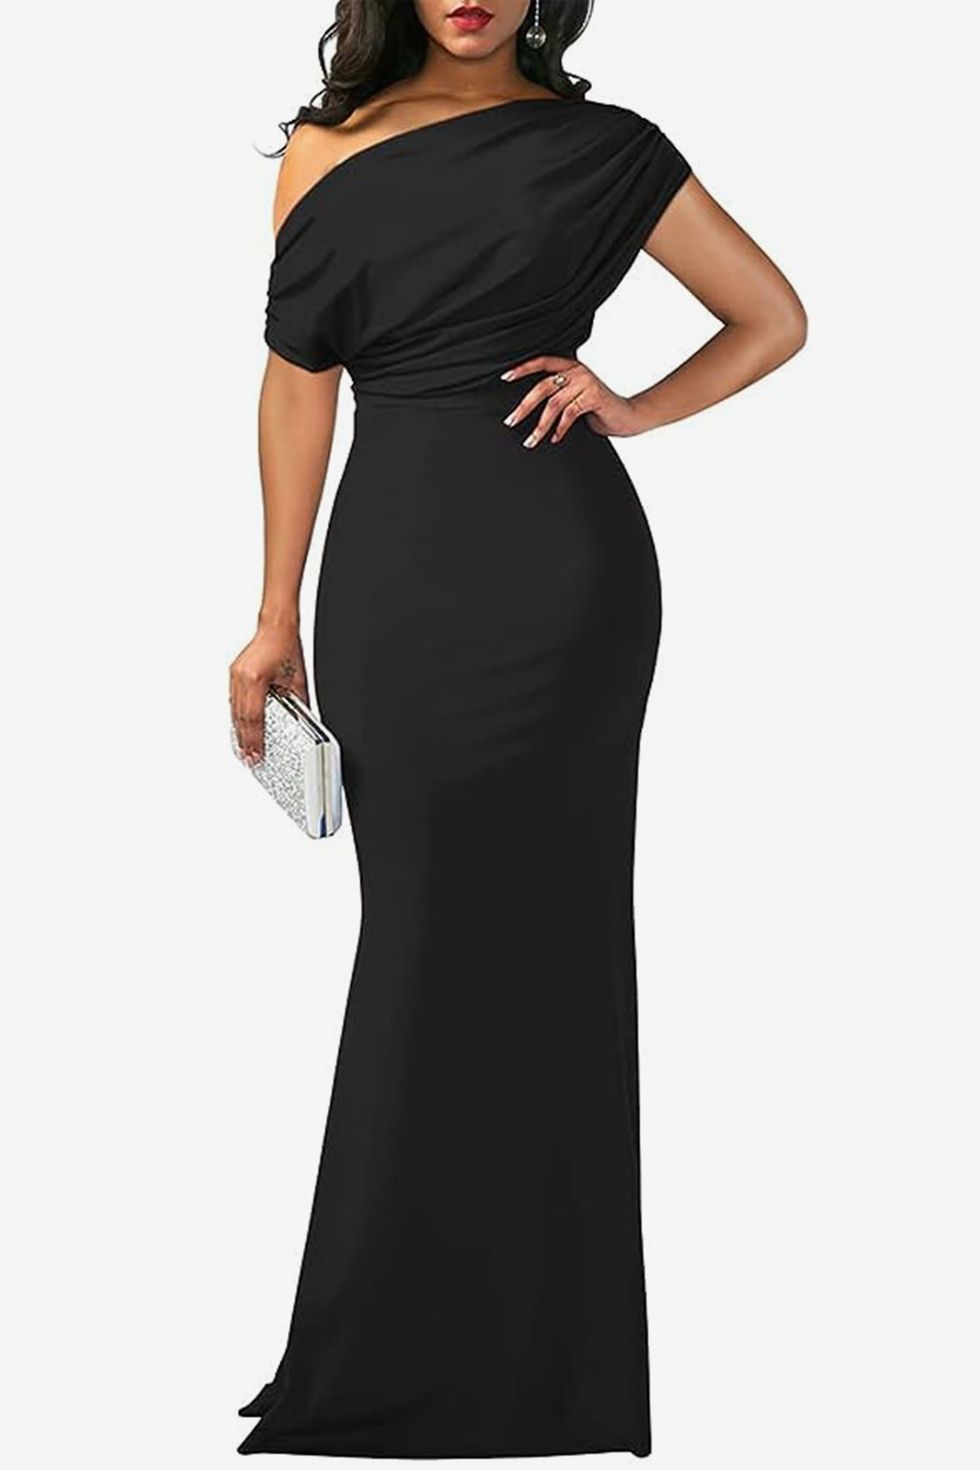 Women Dress Slip Dress Sexy Body-Con High Quality Evening Dress Ball -  China Party Dress and Frock price